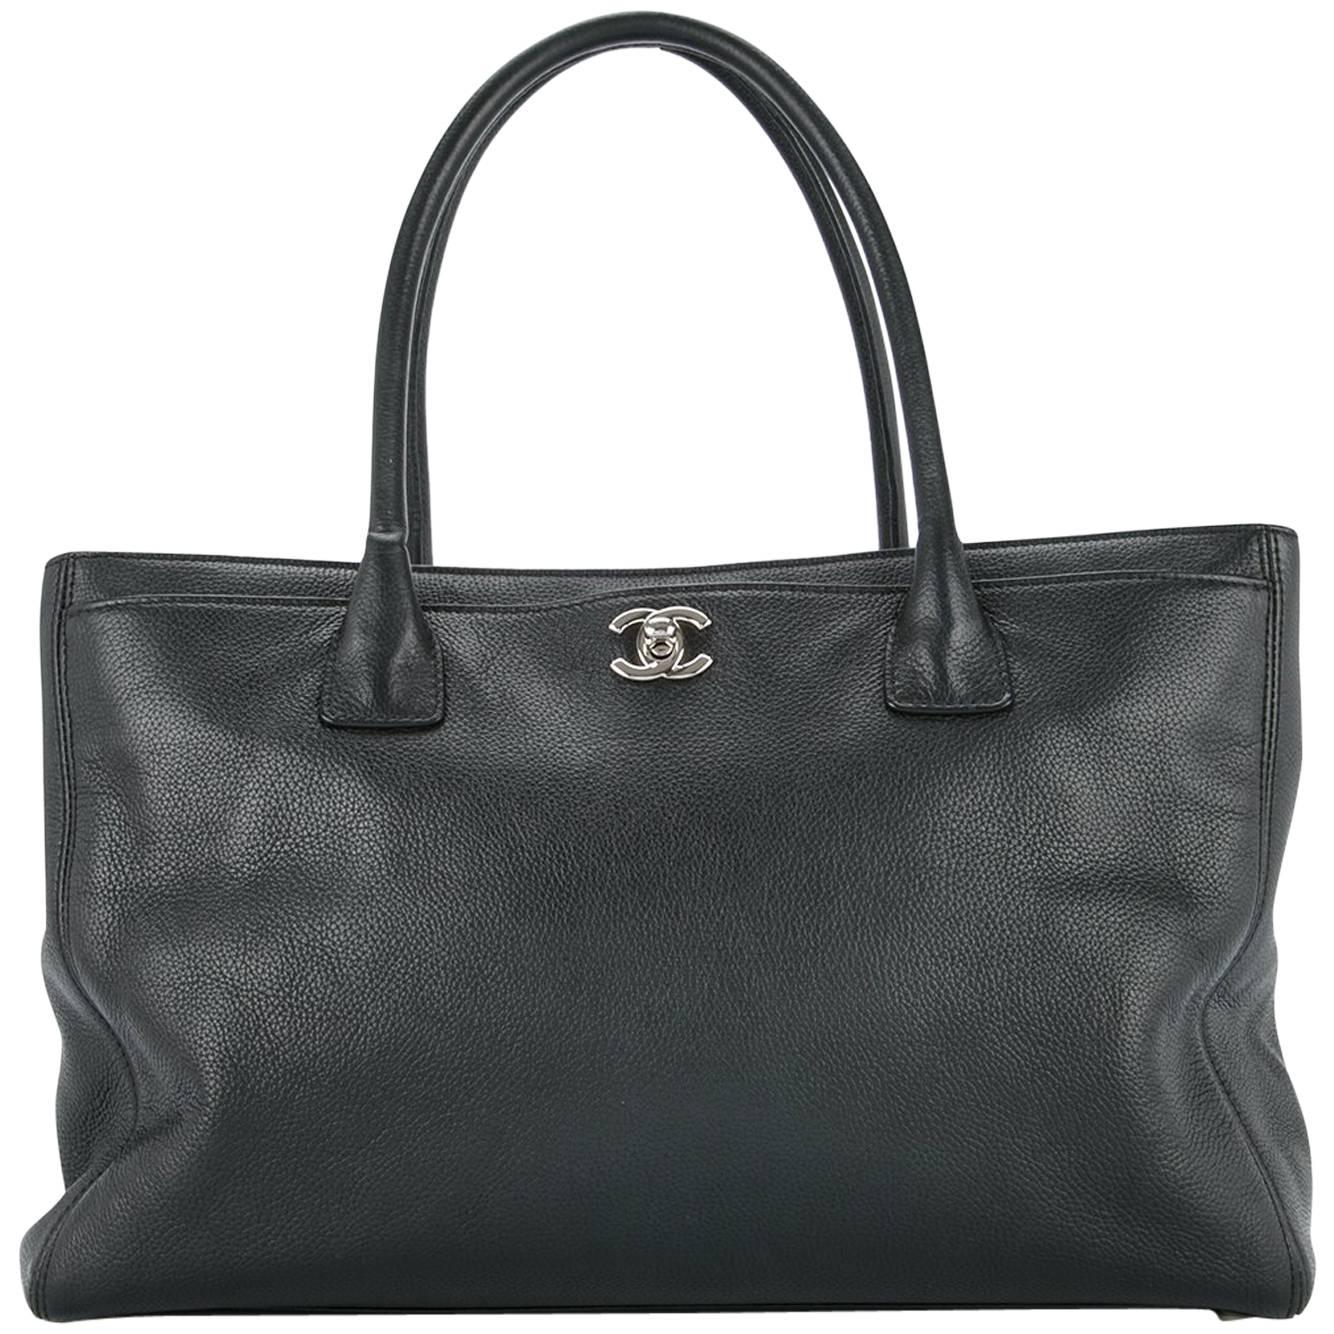 Chanel Black Leather Top Handle Carryall Travel Tote Bag